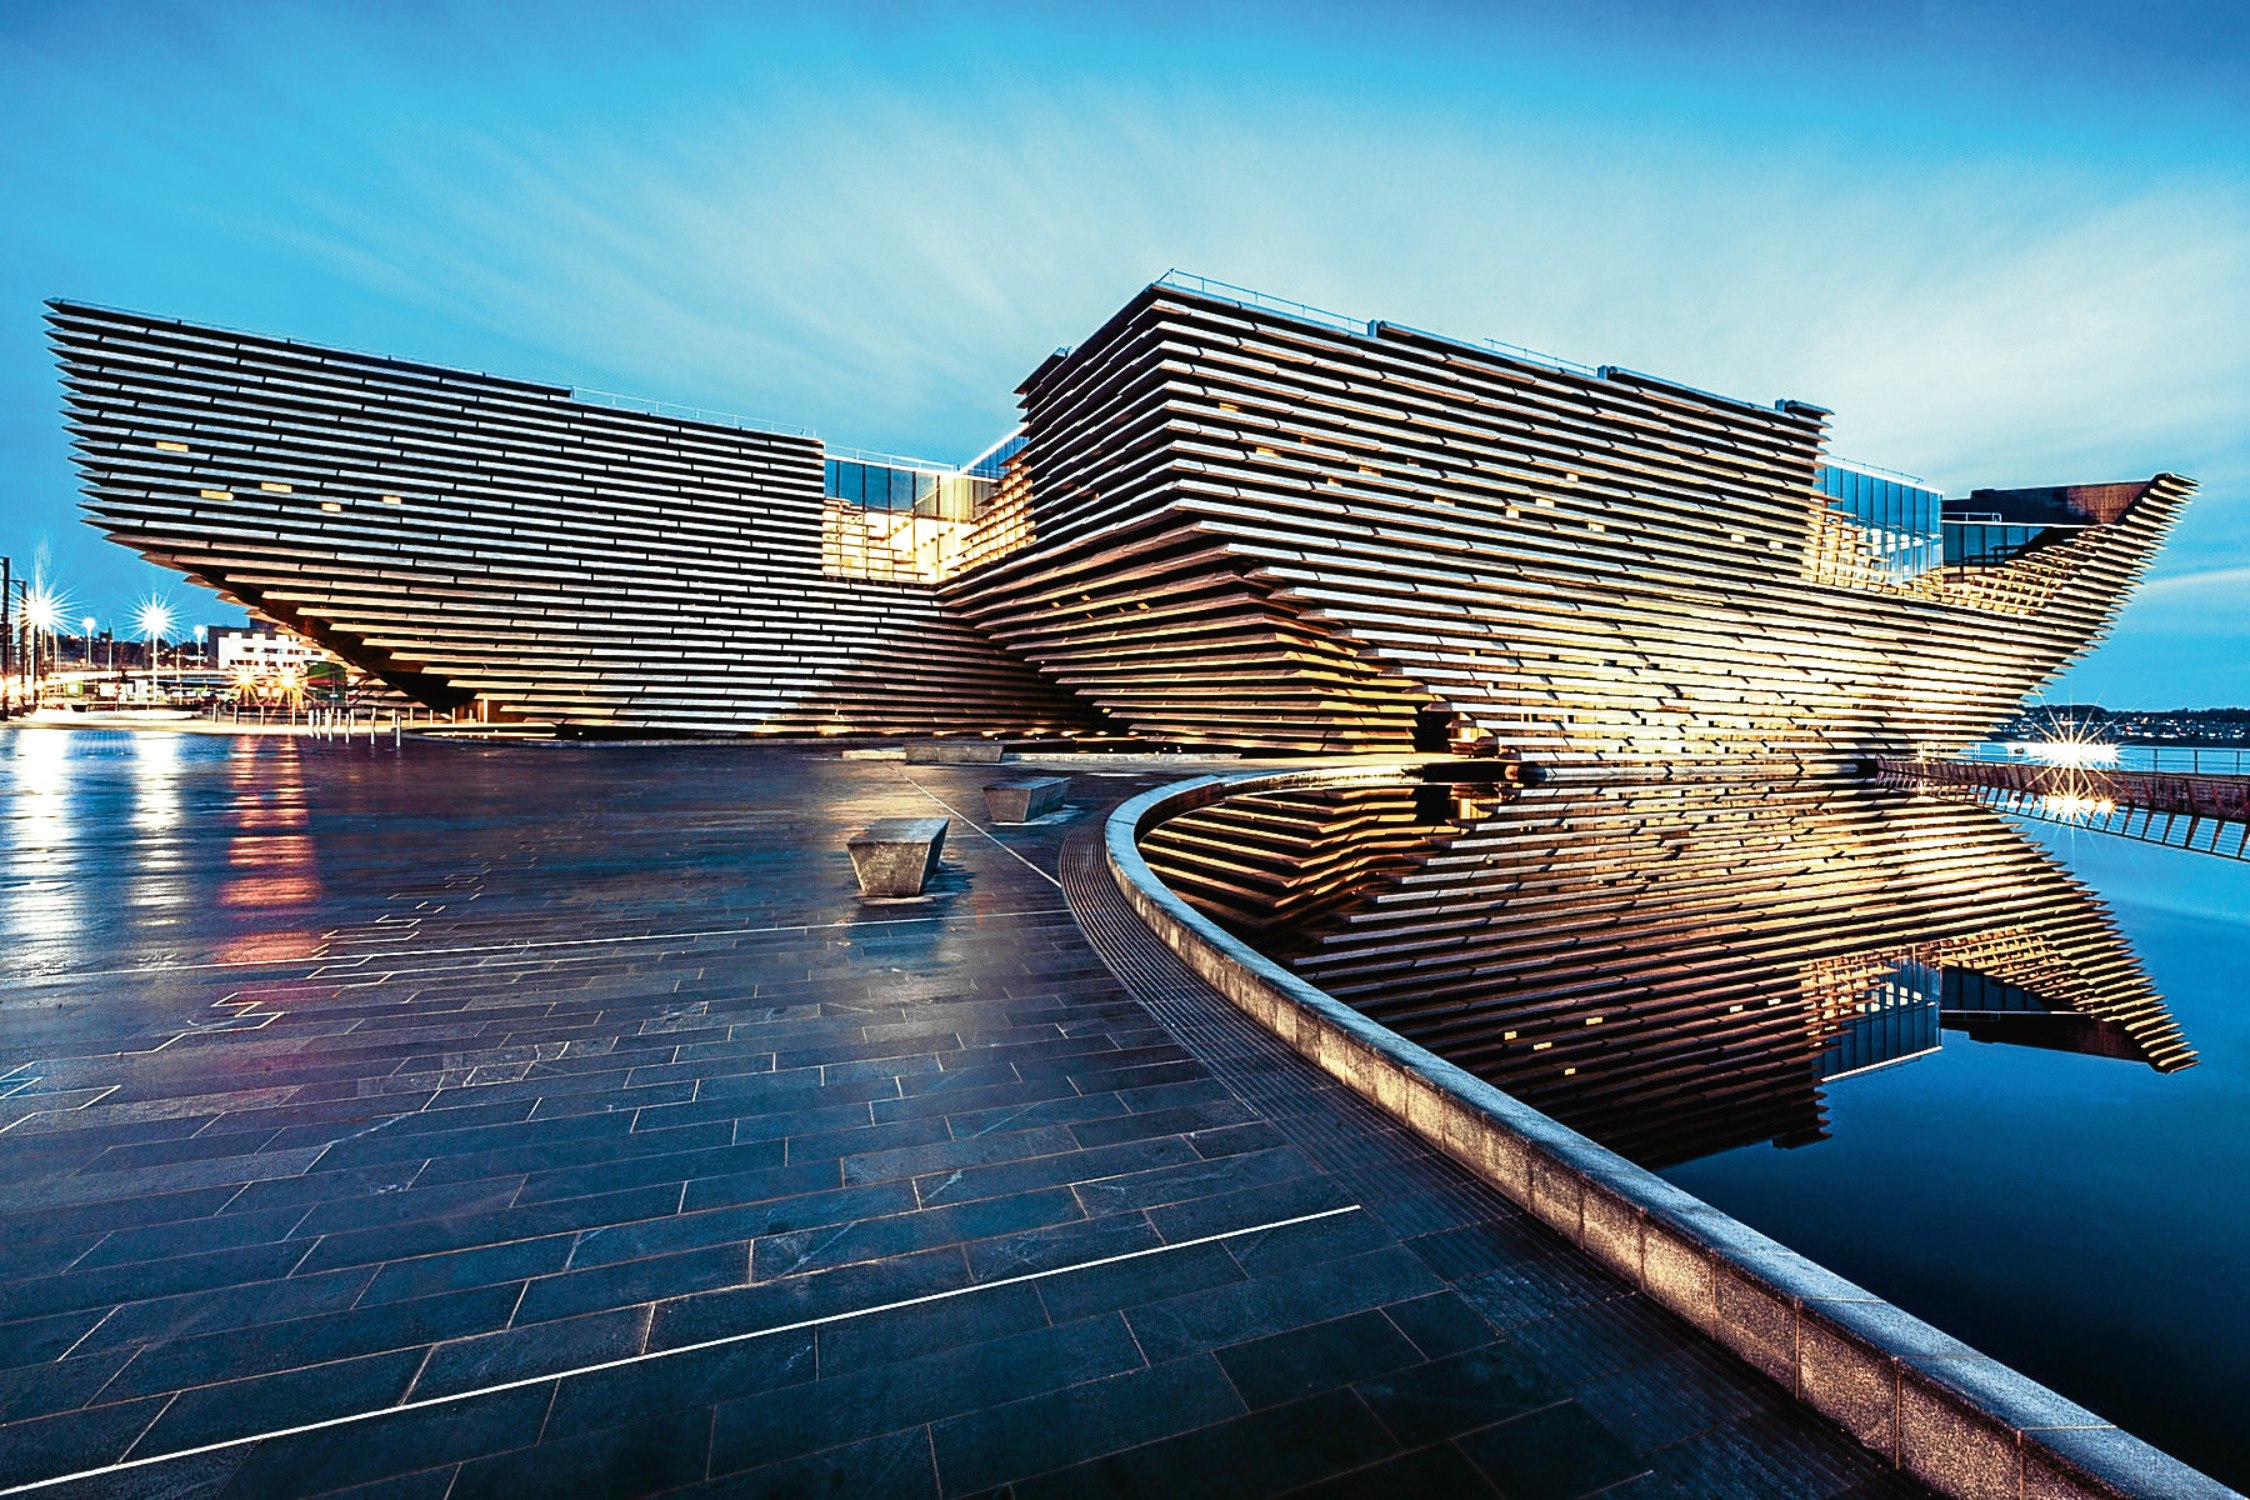 V&A Dundee, which opens on September 15.